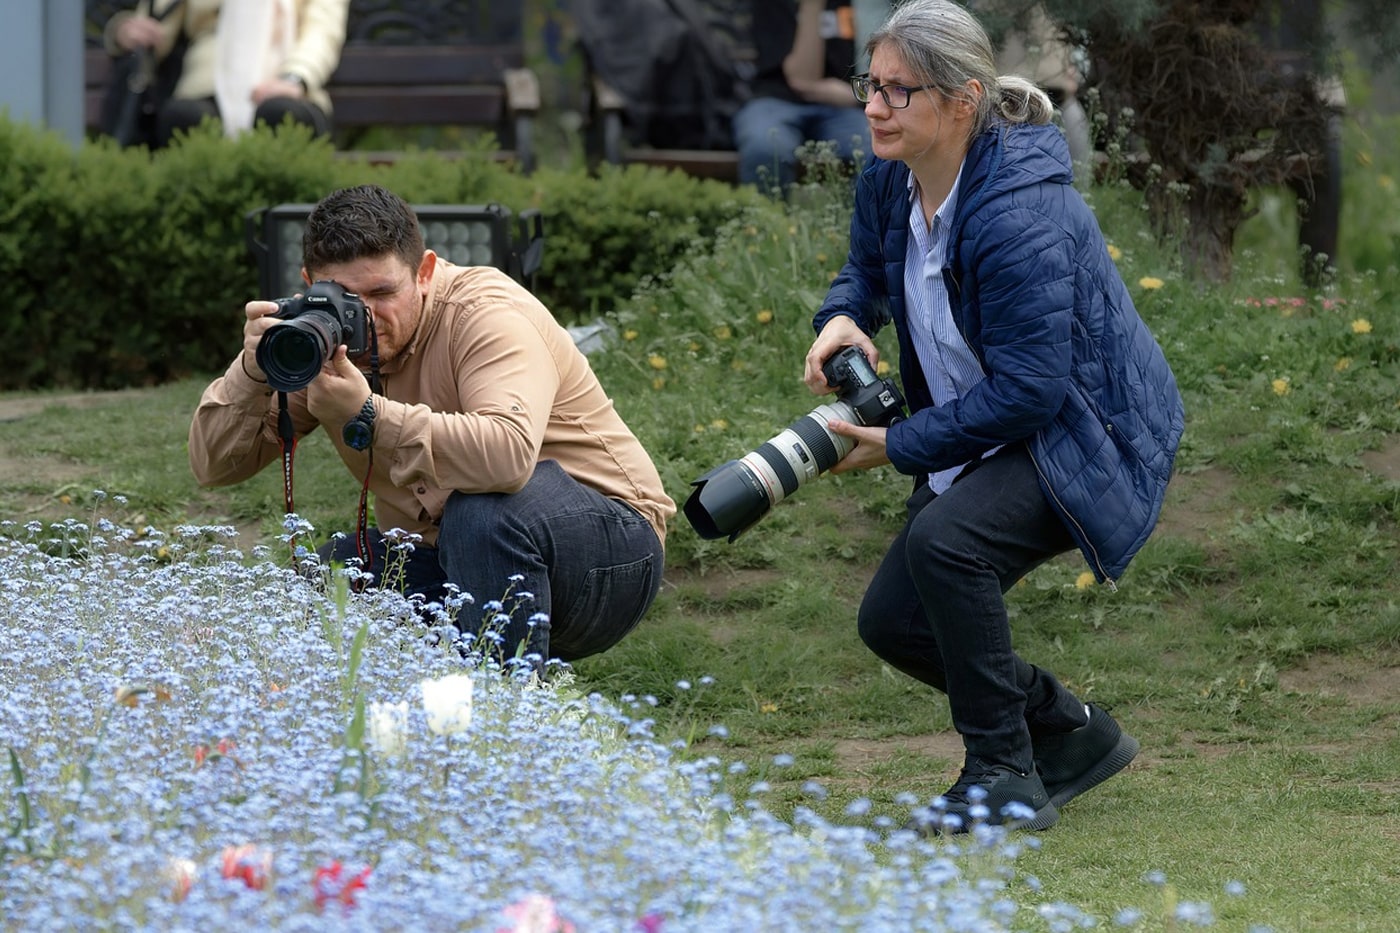 More Flower Garden Photography Tips and Tricks for Your Next Photoshoot